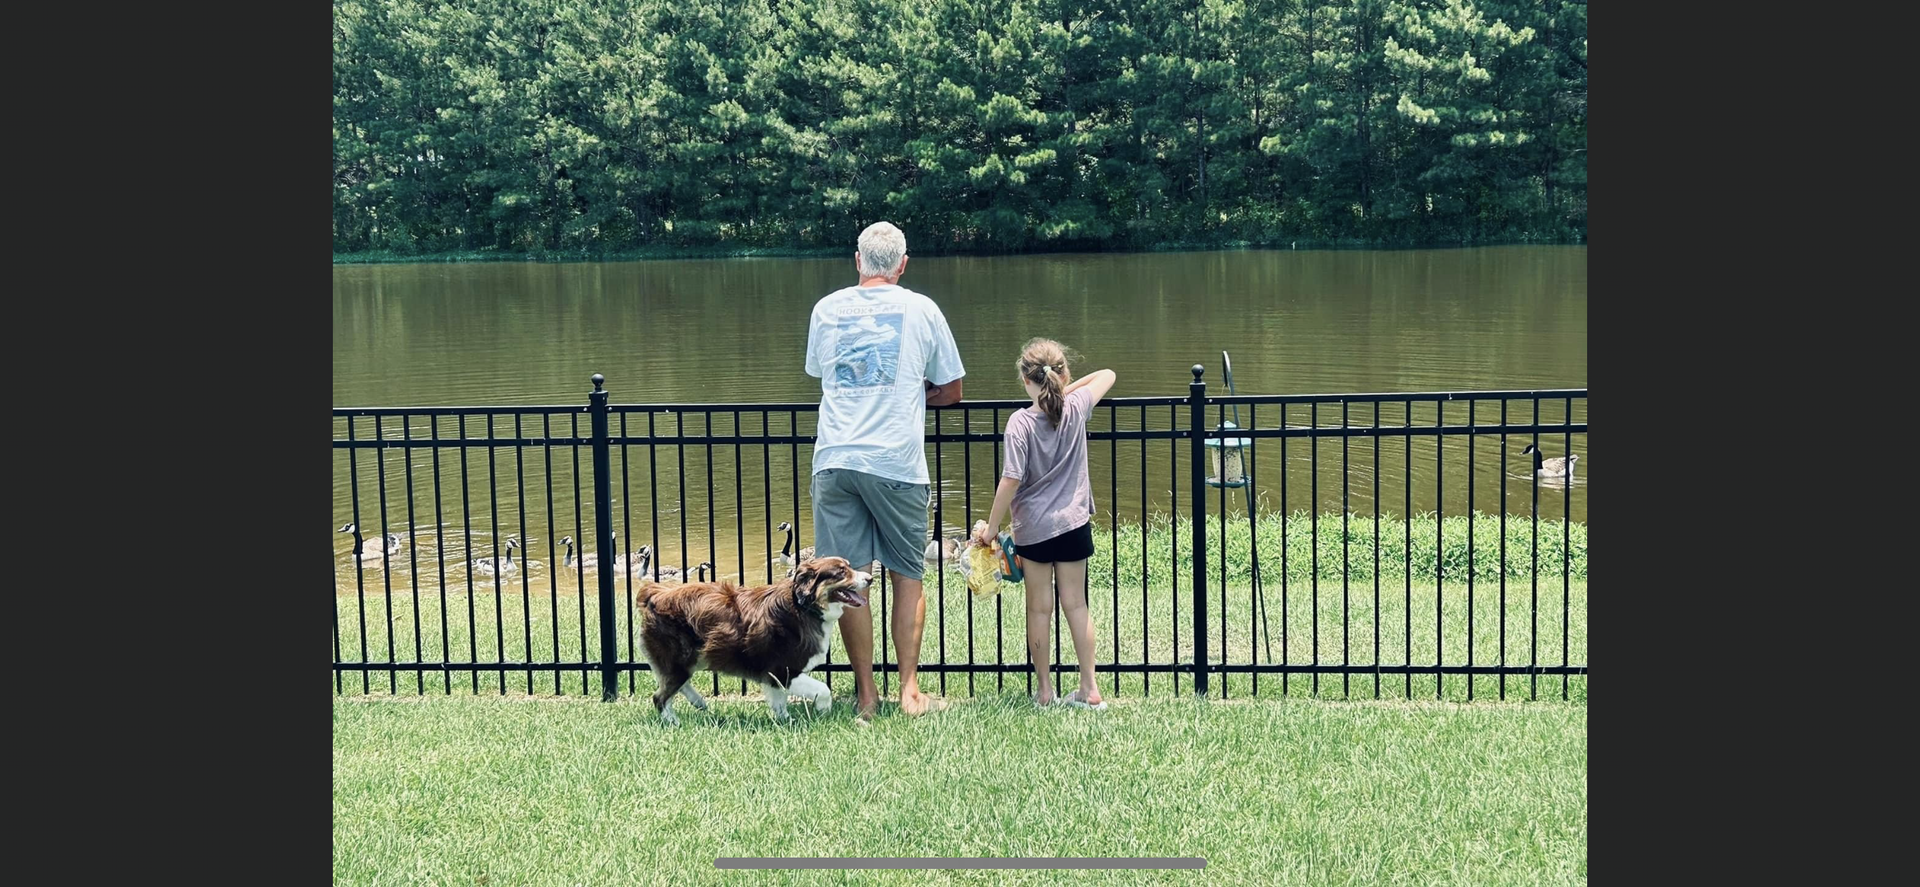 A wrought iron fence around a pond with a family enjoying